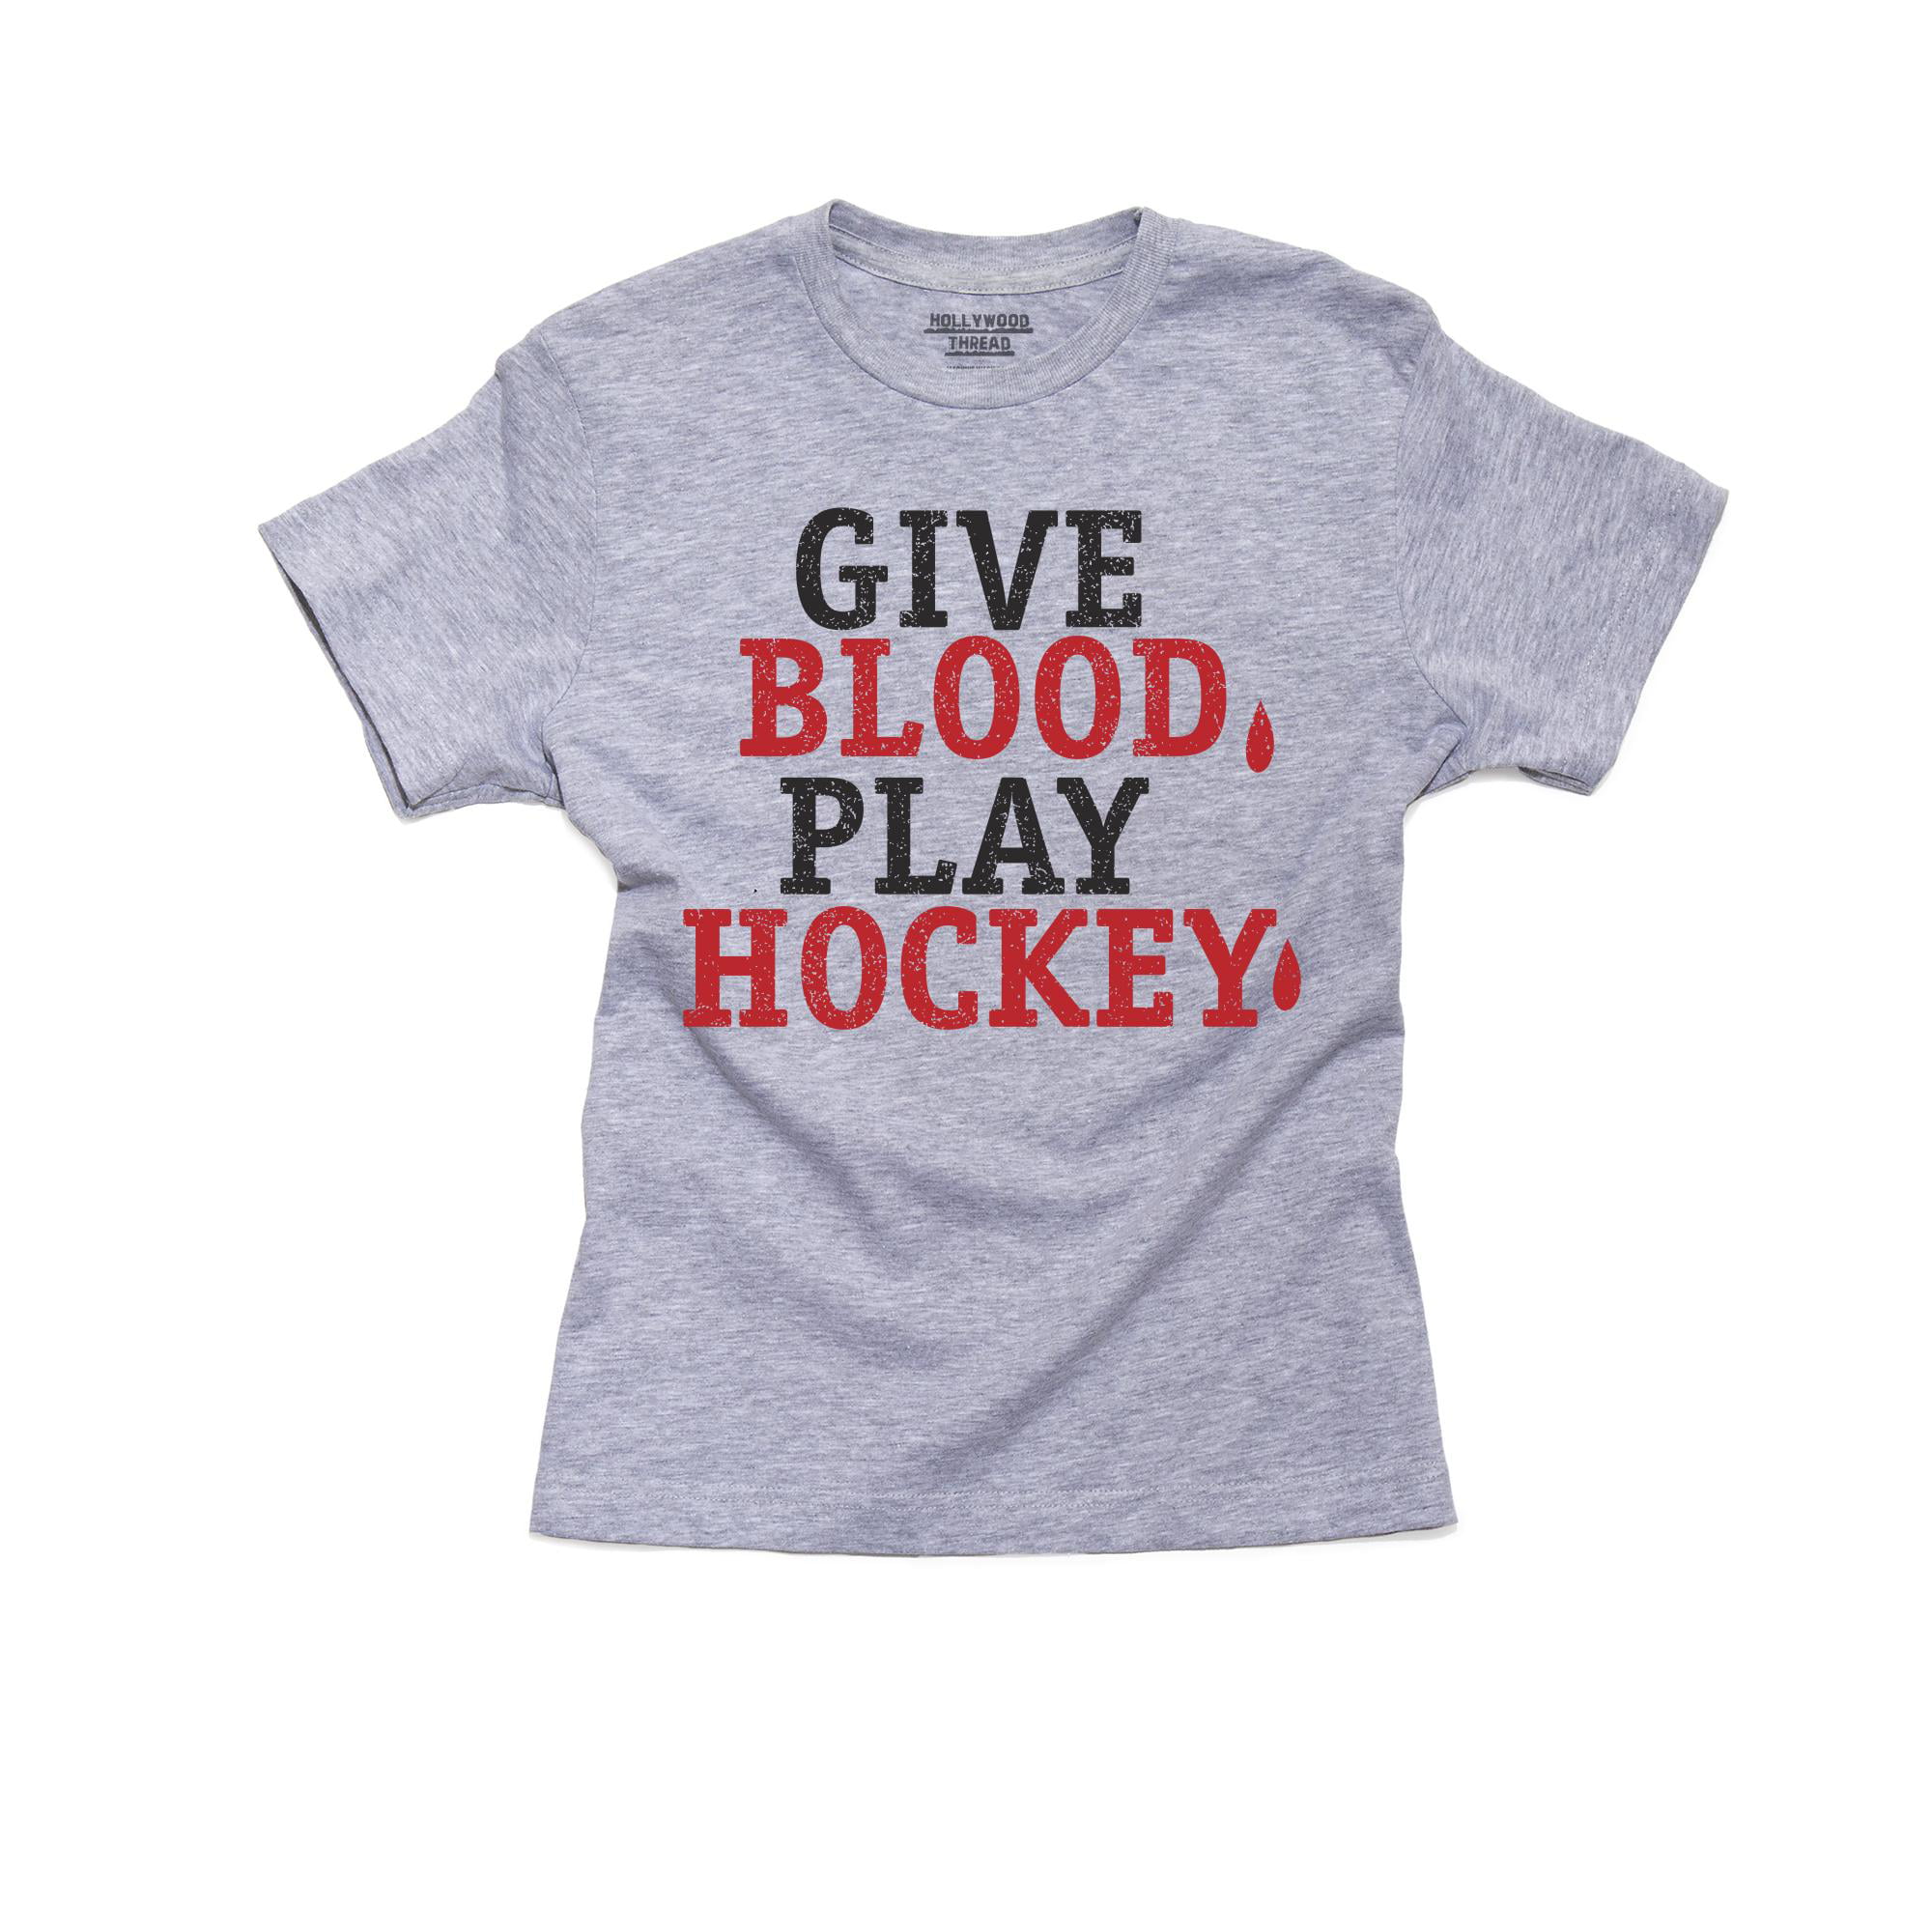 Give Blood, Play Hockey Sport Inspired Text Boy's Cotton Youth T-Shirt